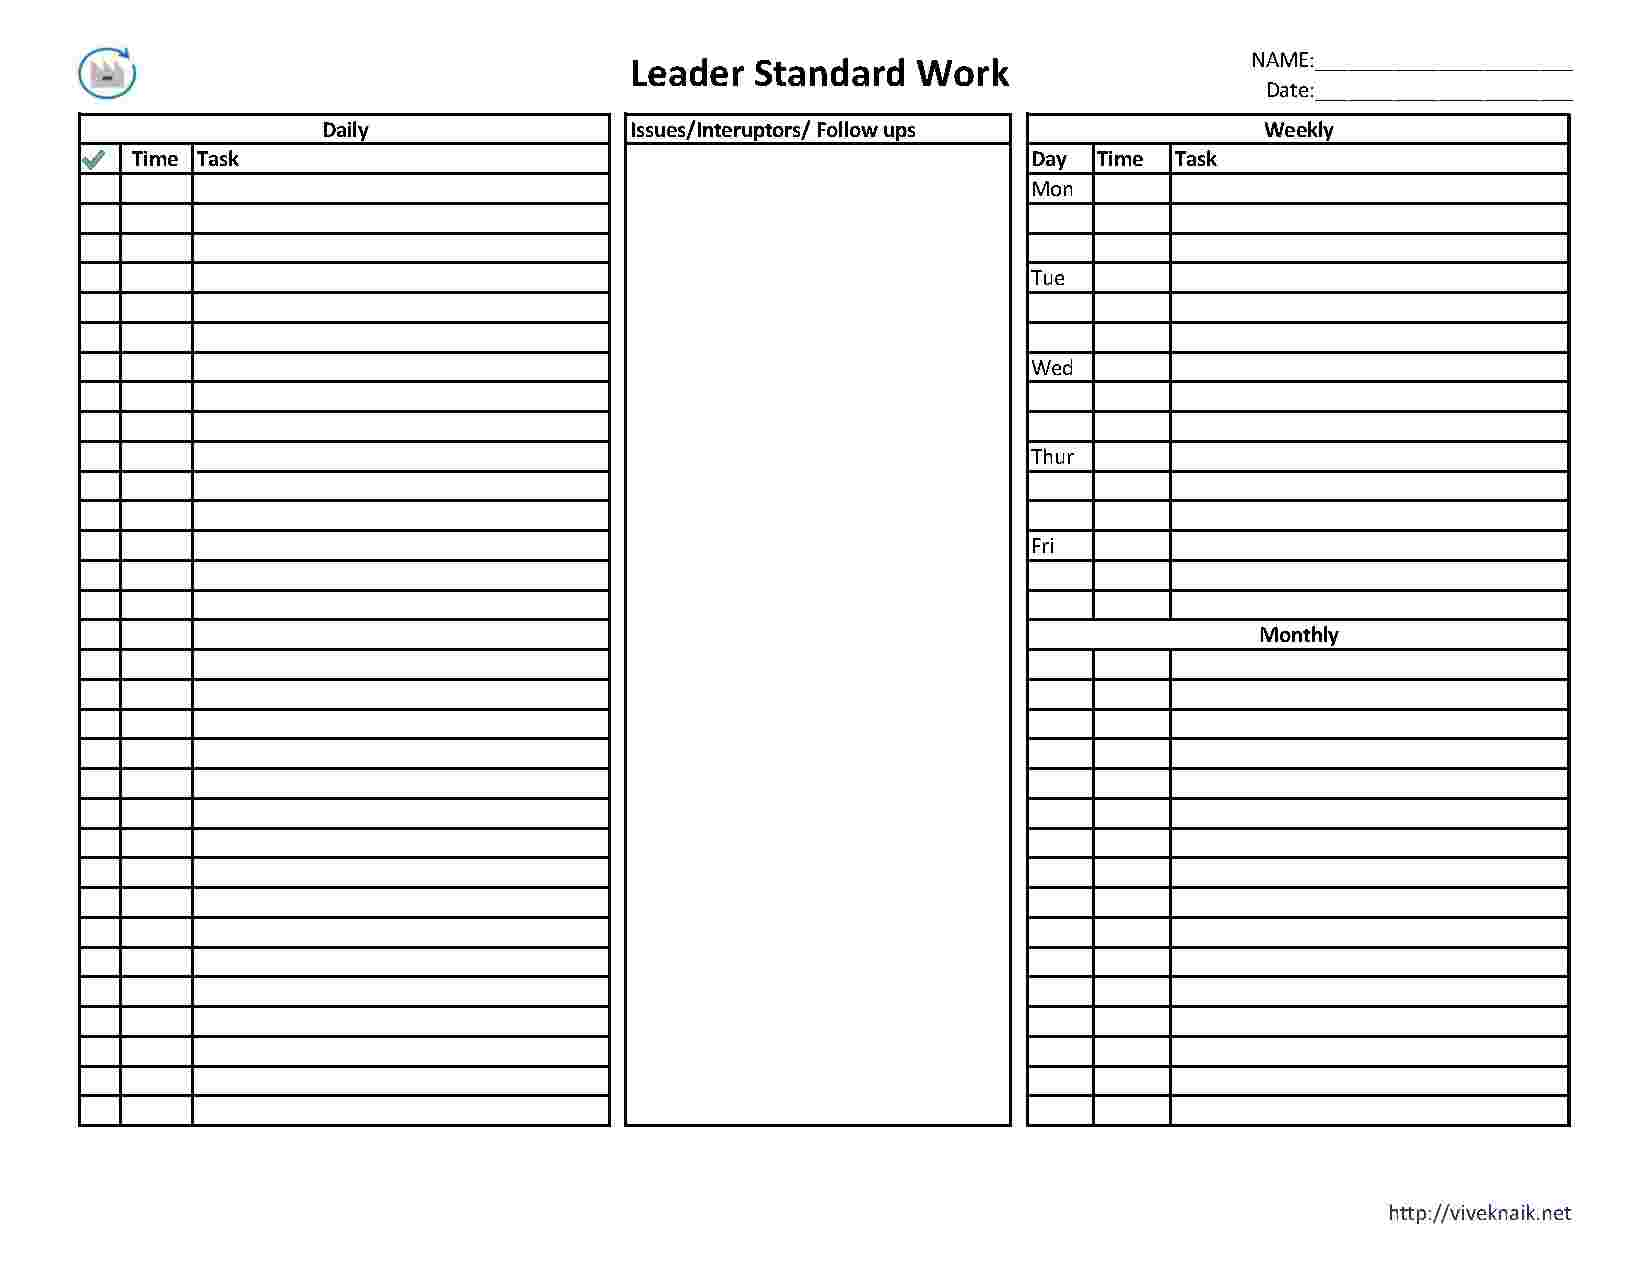 Download Task Manager Style 426 Template For Free At Intended For Leader Standard Work Template